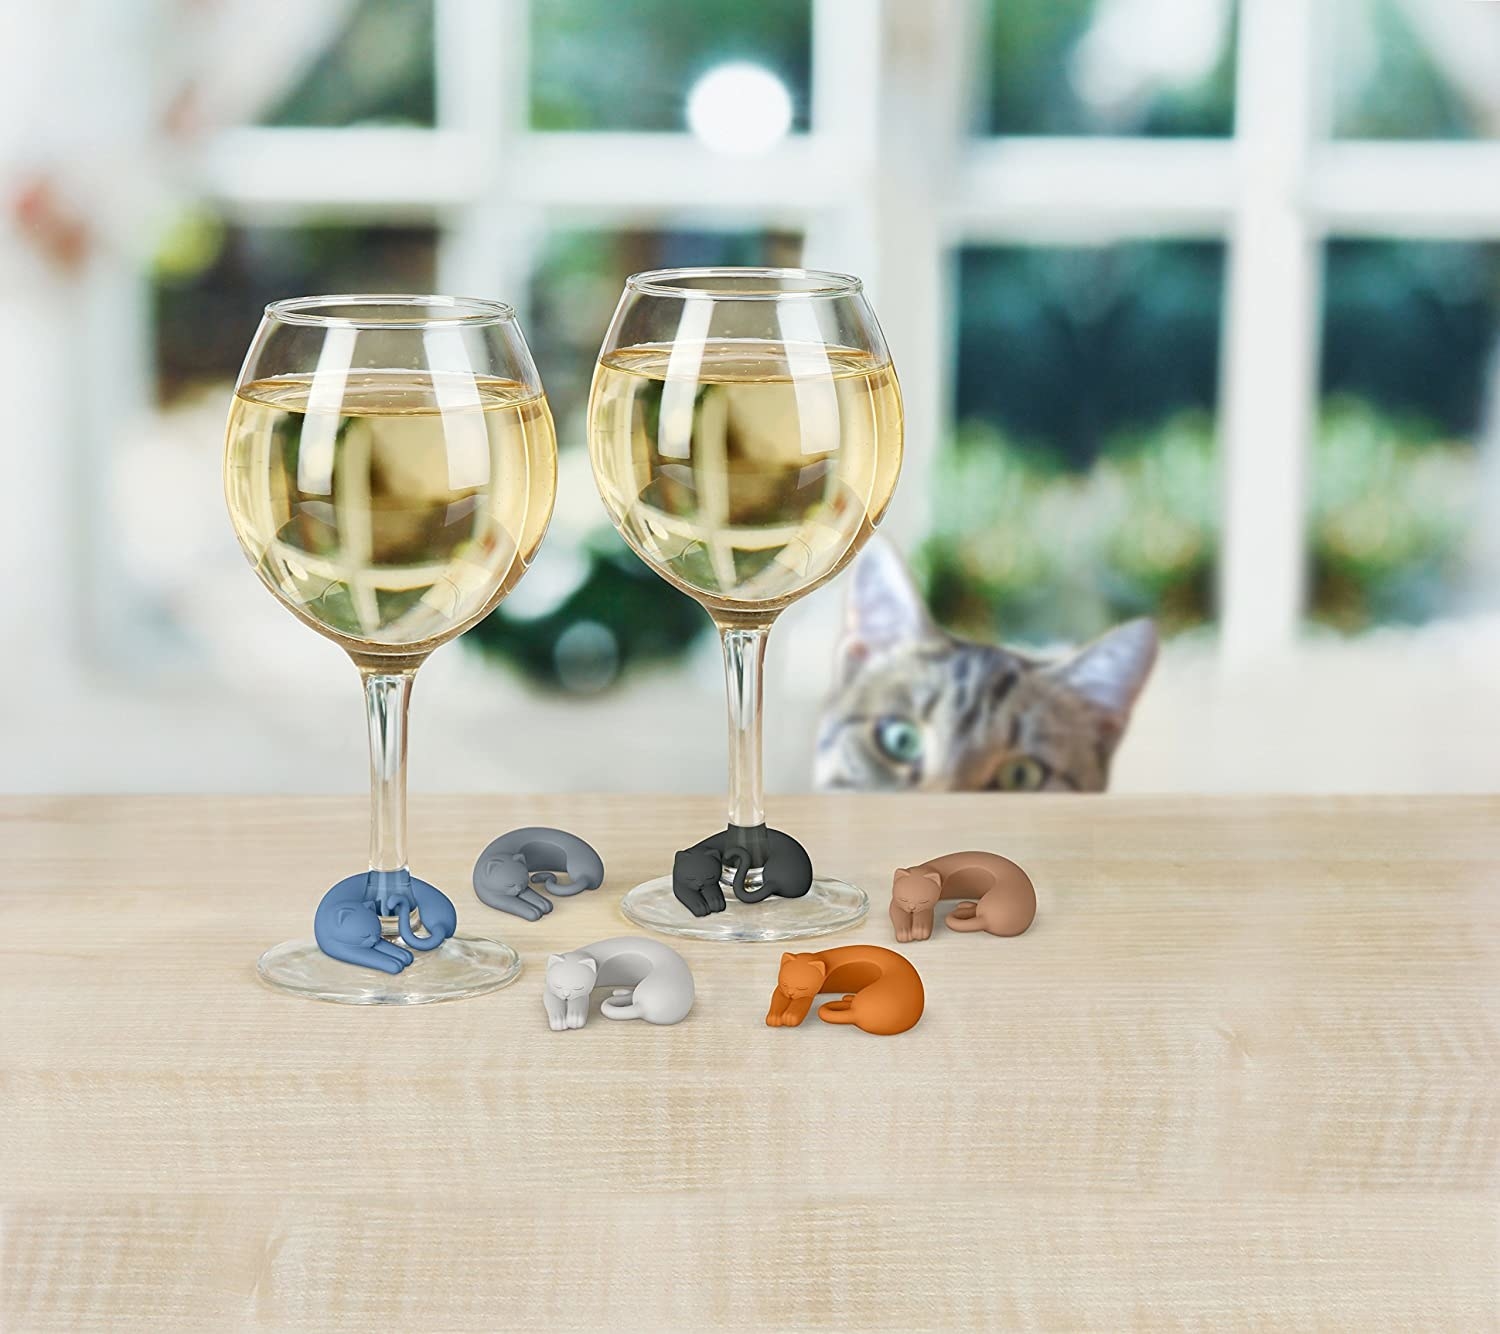 A set of cat-shaped wine markers curled around the stems of wine glasses